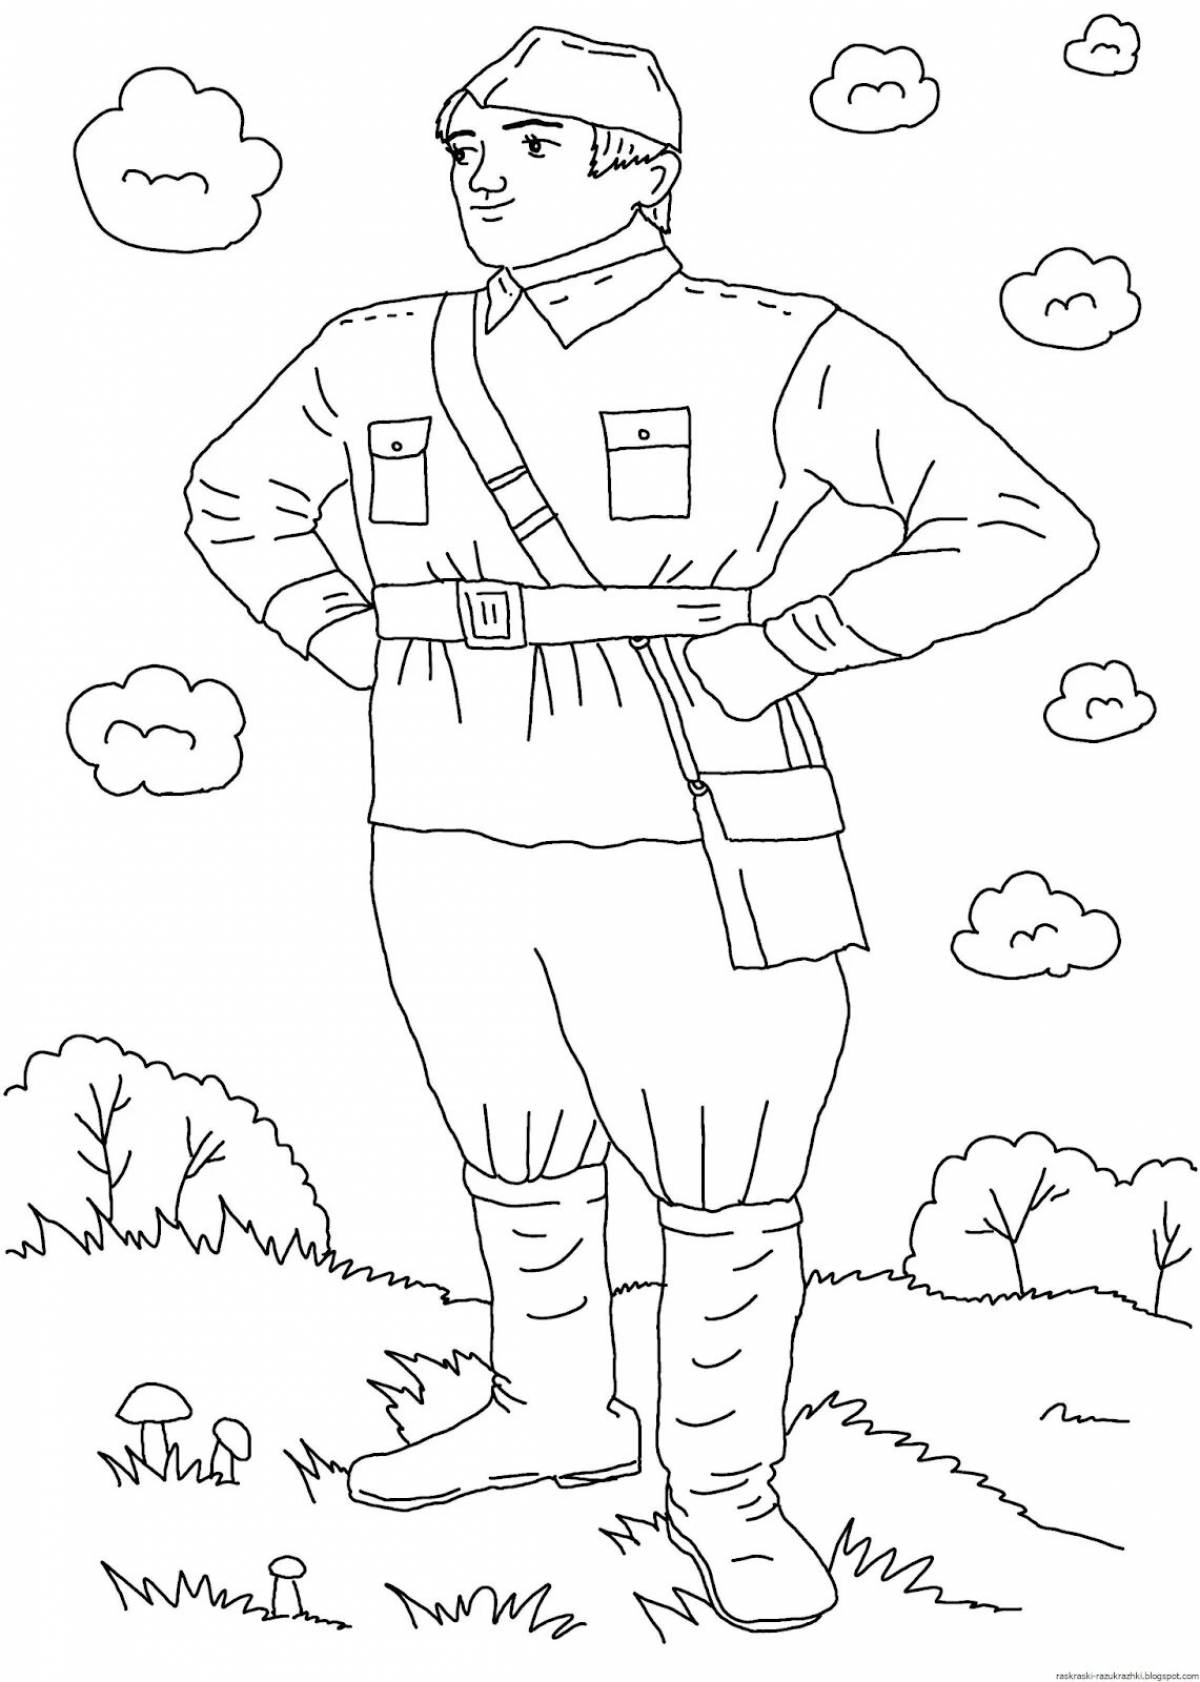 Exquisite soldier coloring book for kids